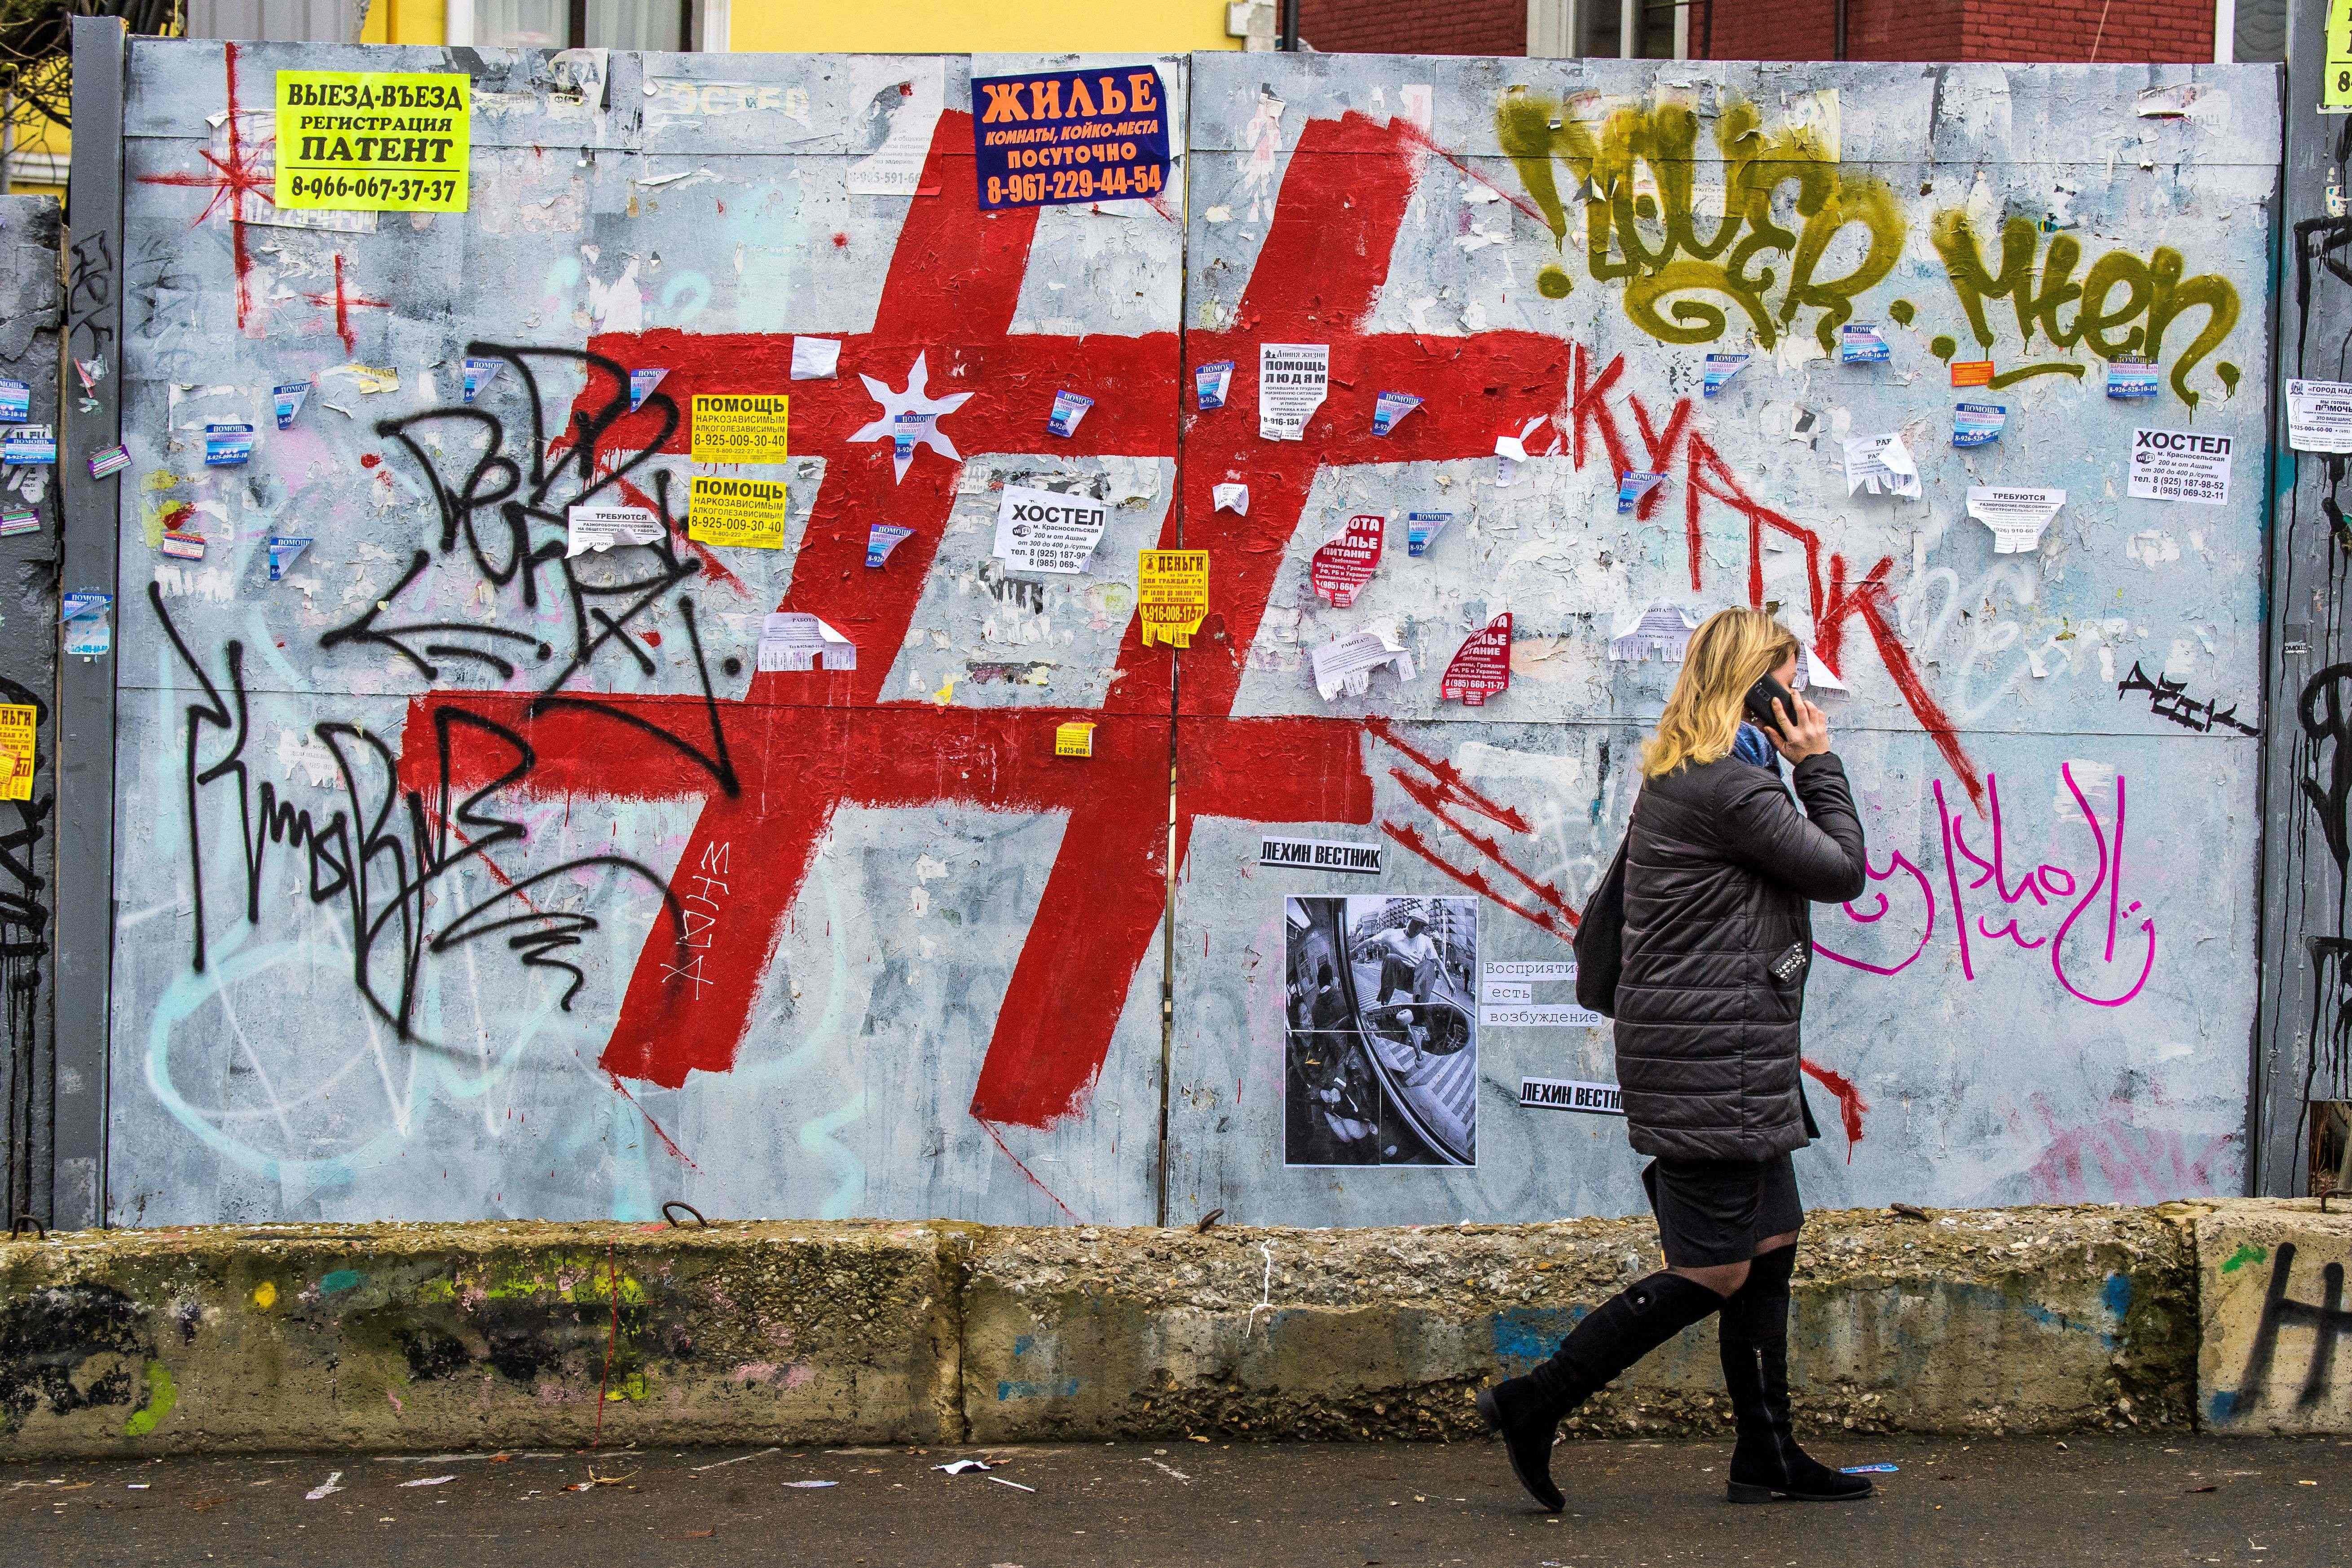 A woman speaks on a mobile phone as she walks past a graffiti covered wall with a giant hashtag sign near Moscow's Kursky railway station on November 17, 2017. / AFP PHOTO / Mladen ANTONOV        (Photo credit should read MLADEN ANTONOV/AFP/Getty Images)